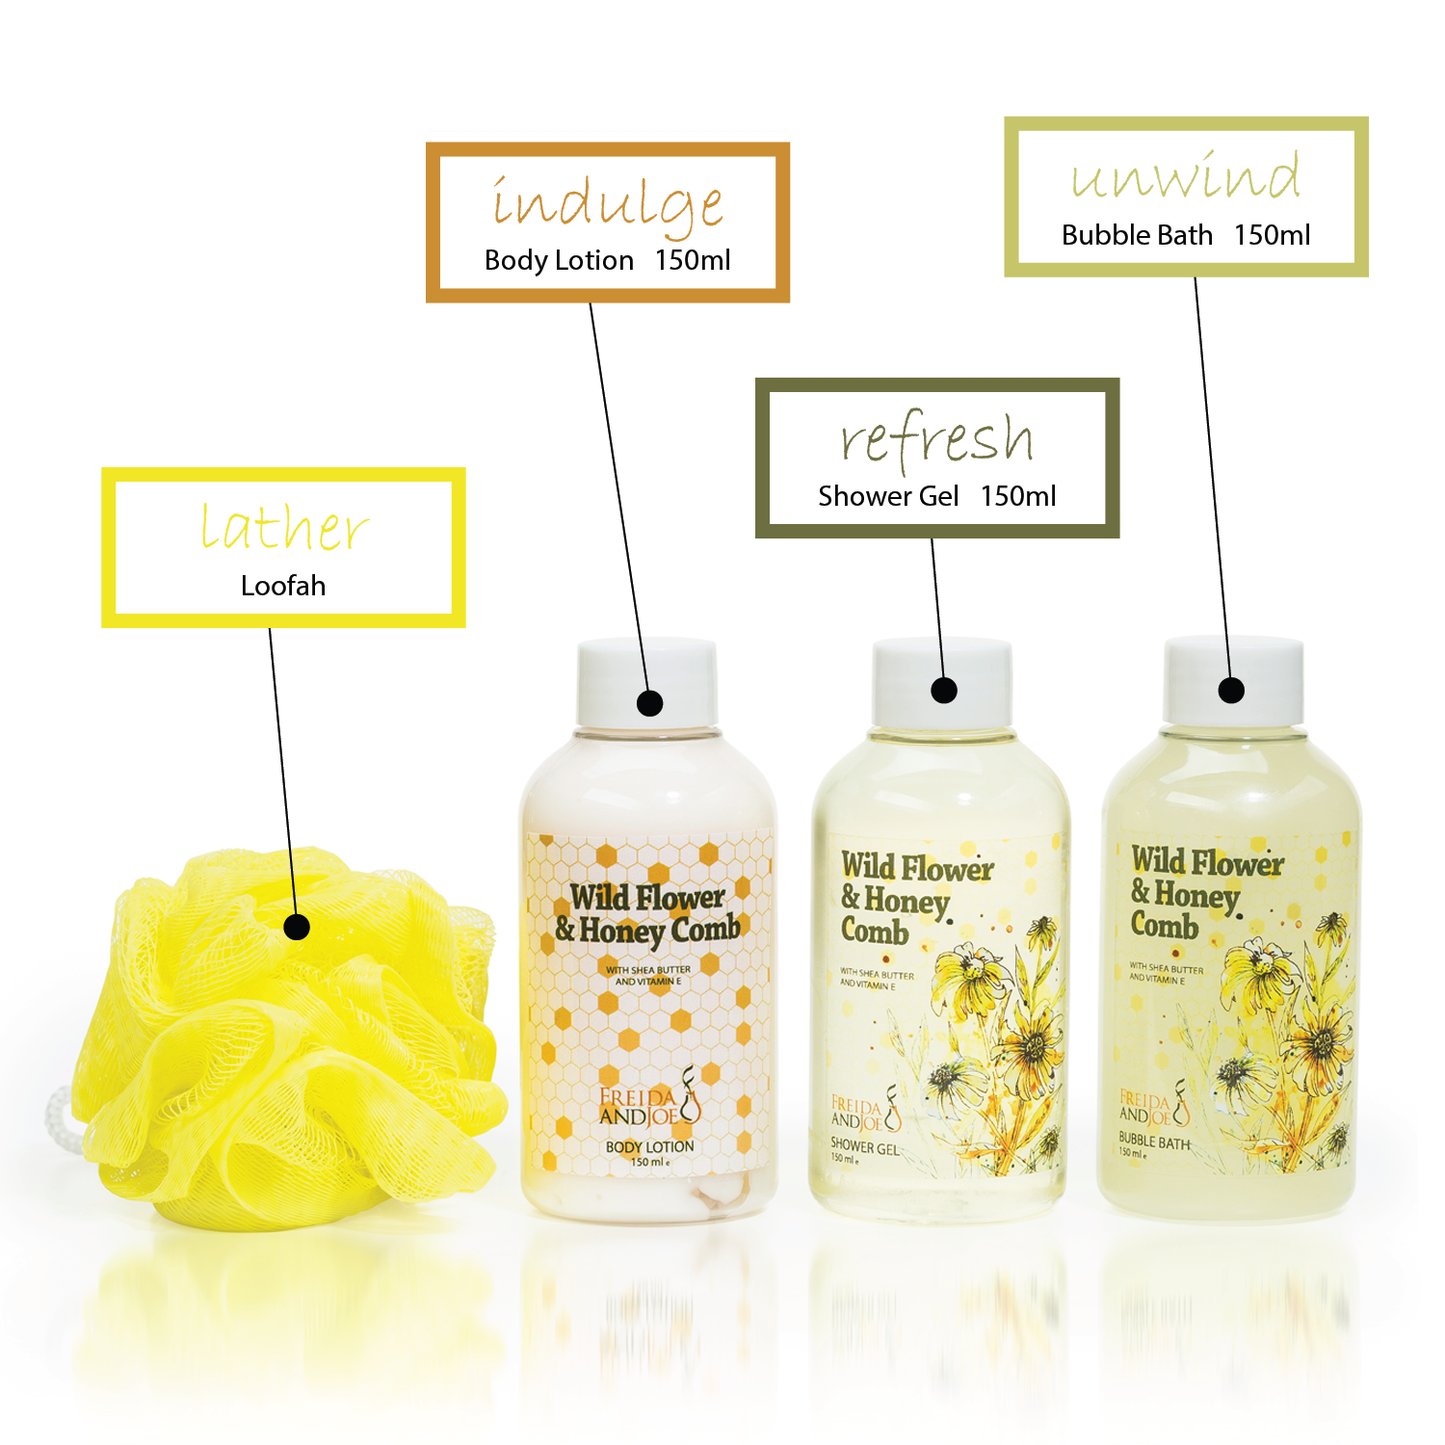 Wild Flower and Honey Comb Spa Gift Set: Shower Gel, Bubble Bath, Body Lotion, & Puff